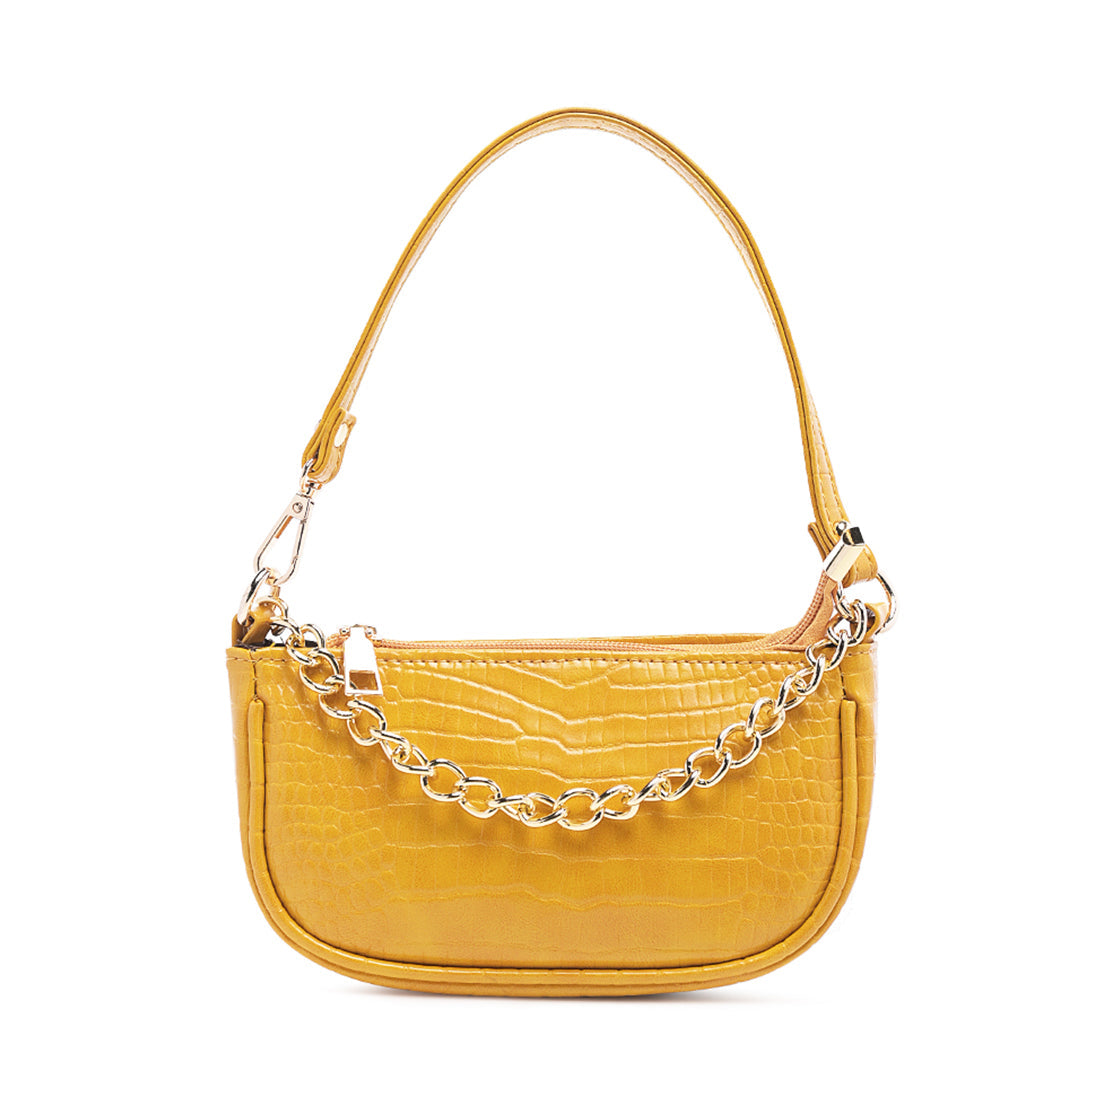 Croc Sling Bag in Yellow - One Size